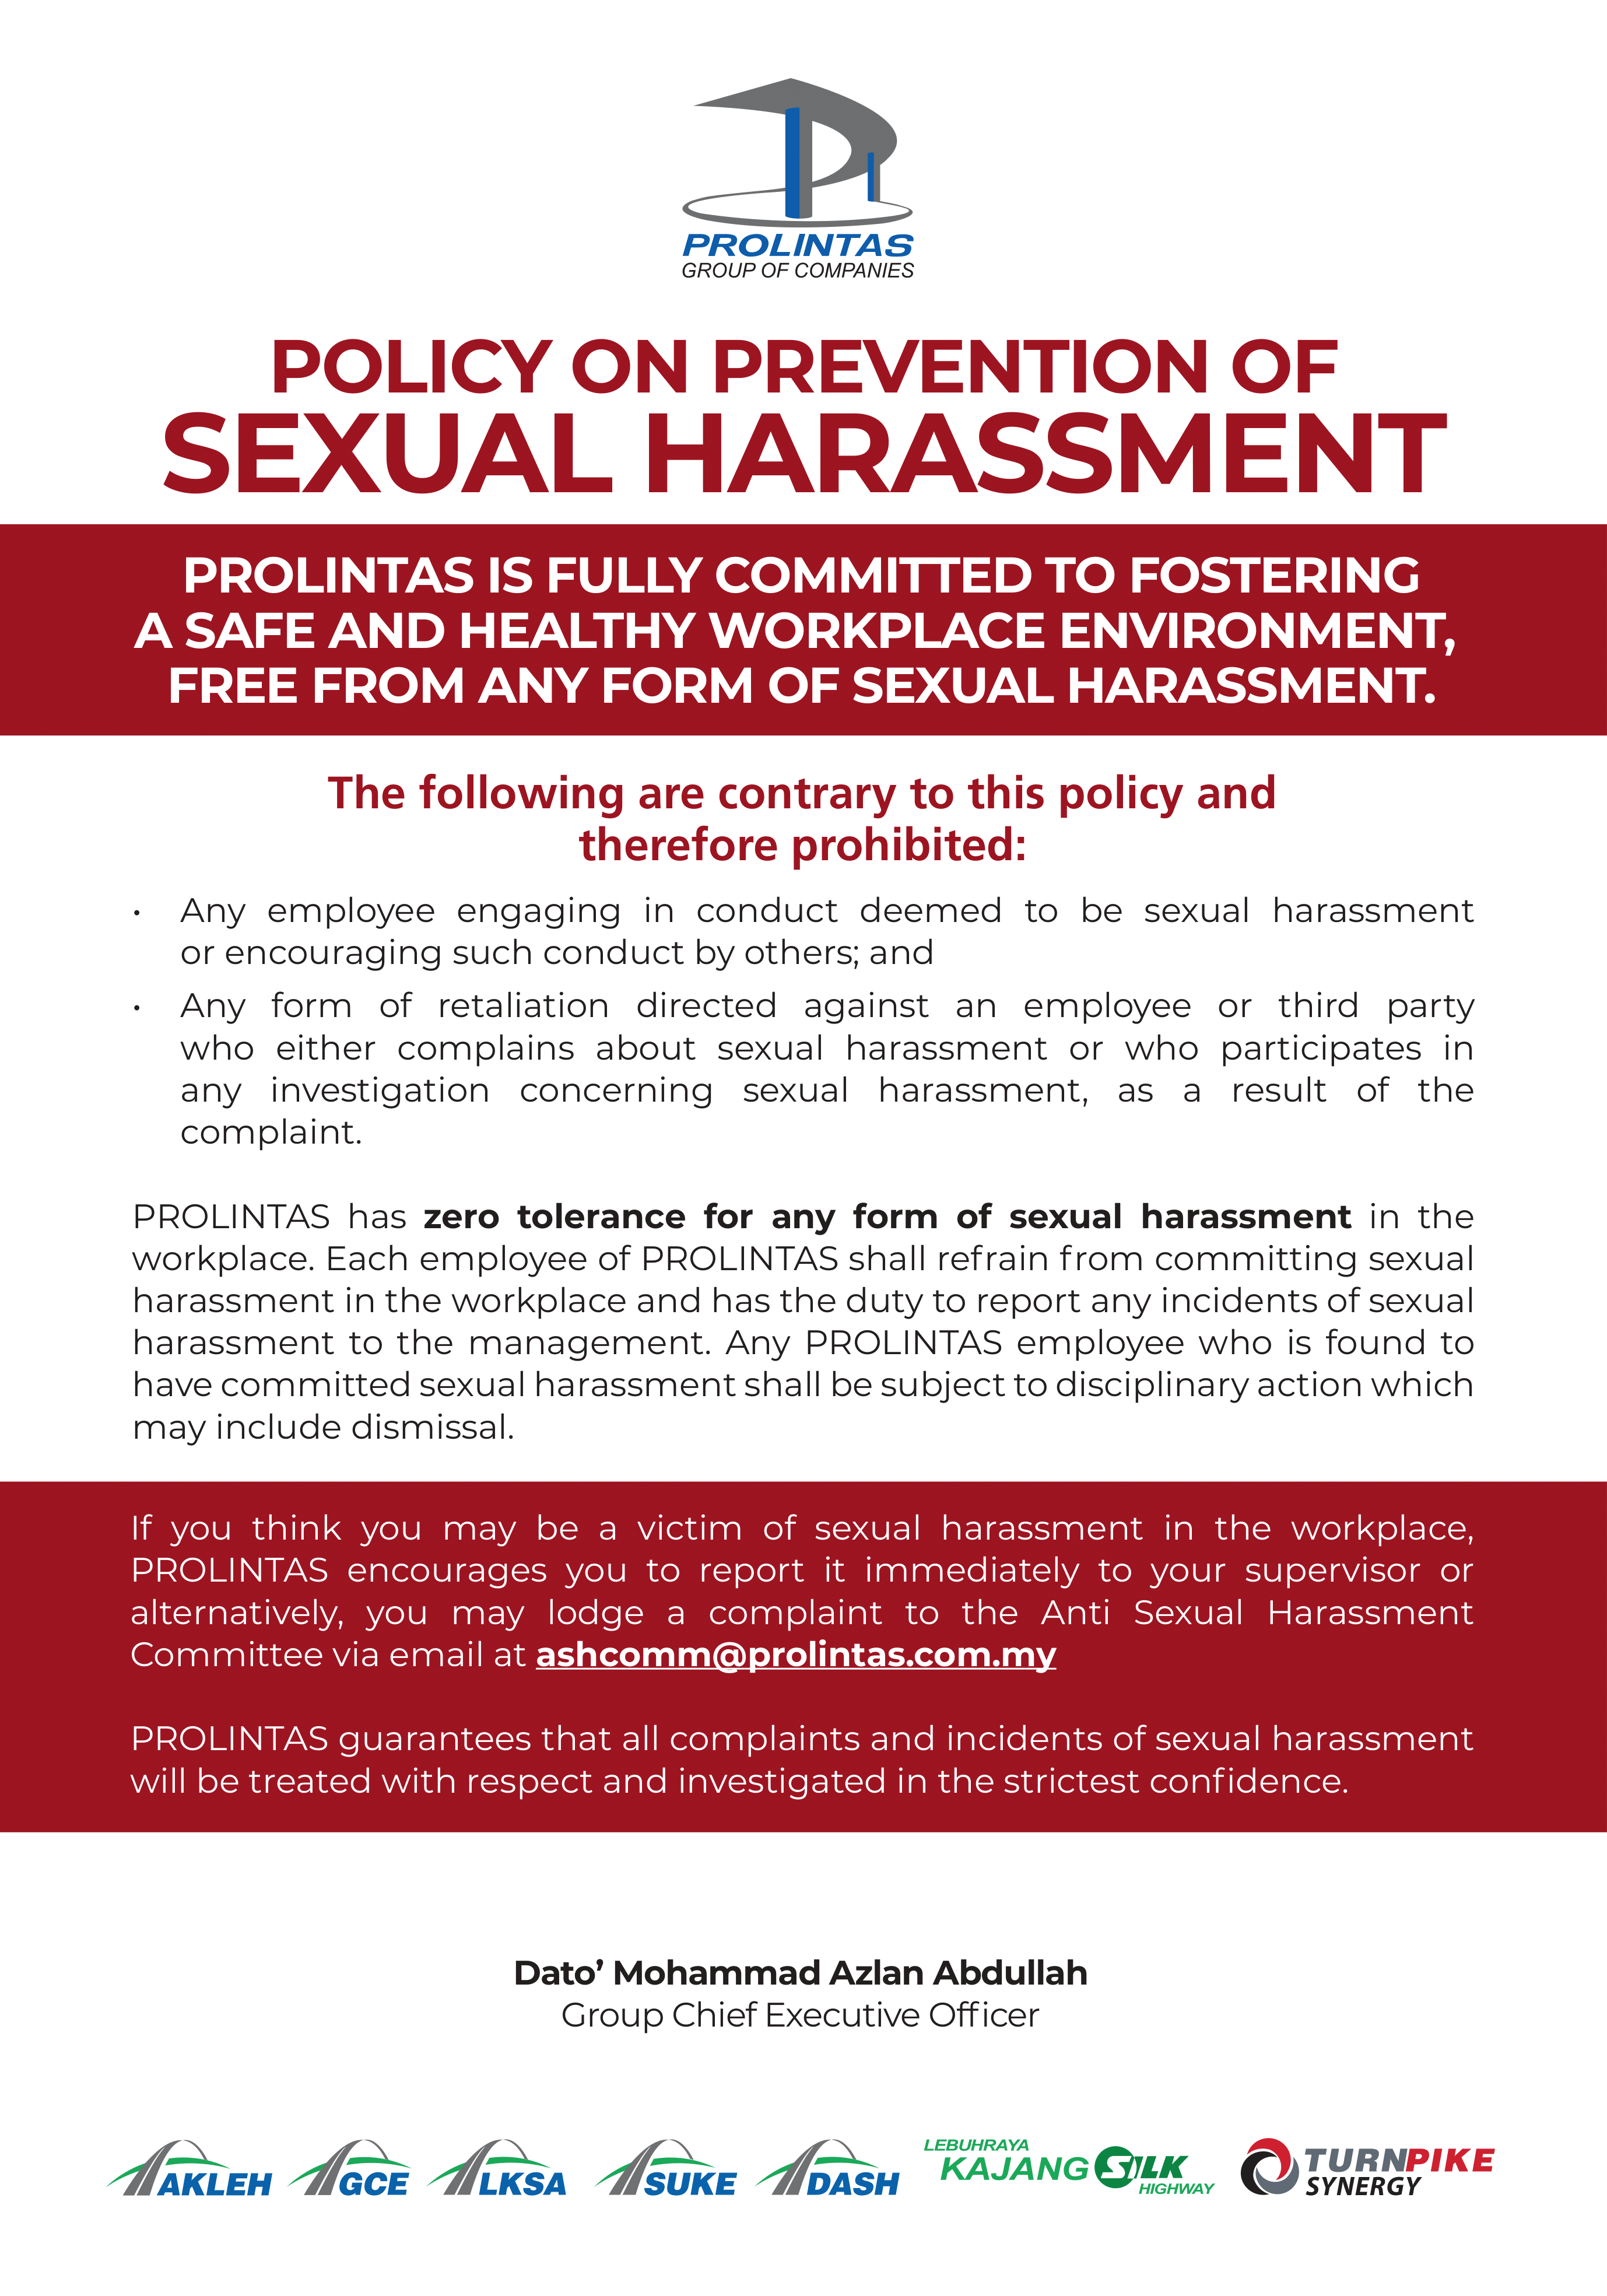 Policy on Prevention of Sexual Harassment